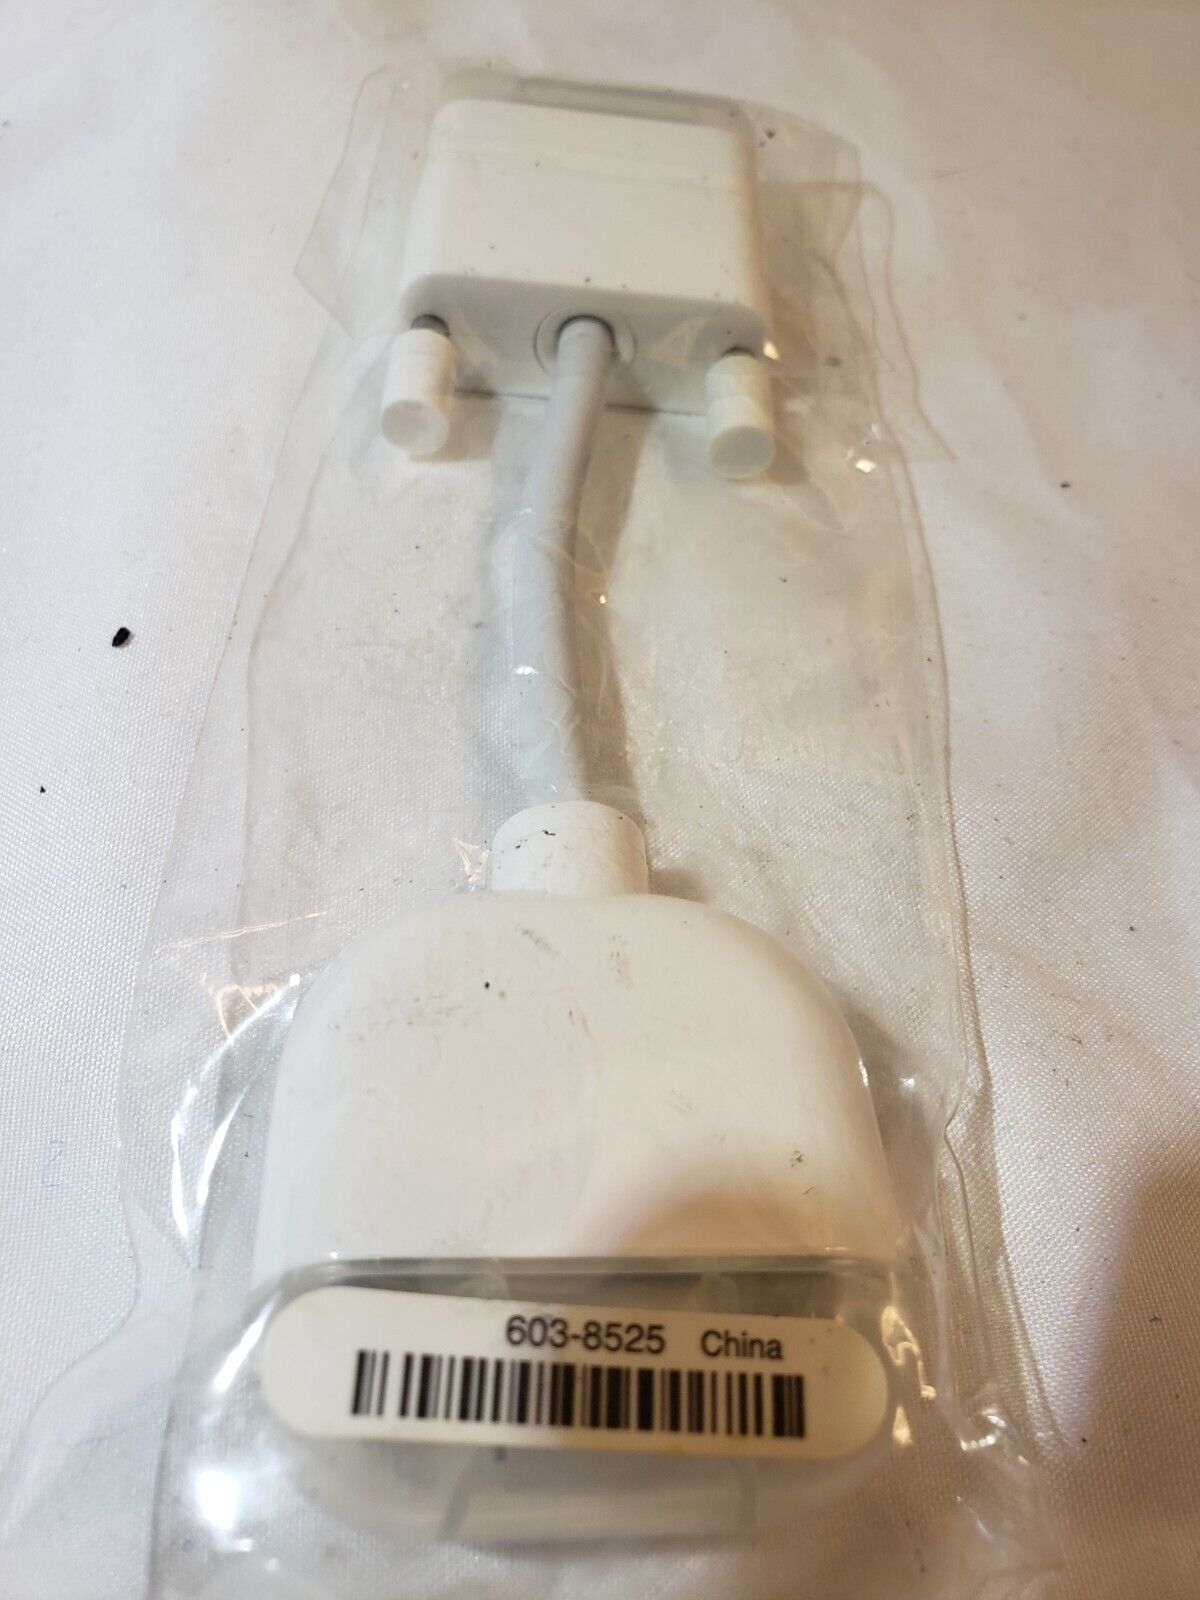 NEW Genuine OEM Apple/Mac 603-8525 DVI to VGA Adapter Cable